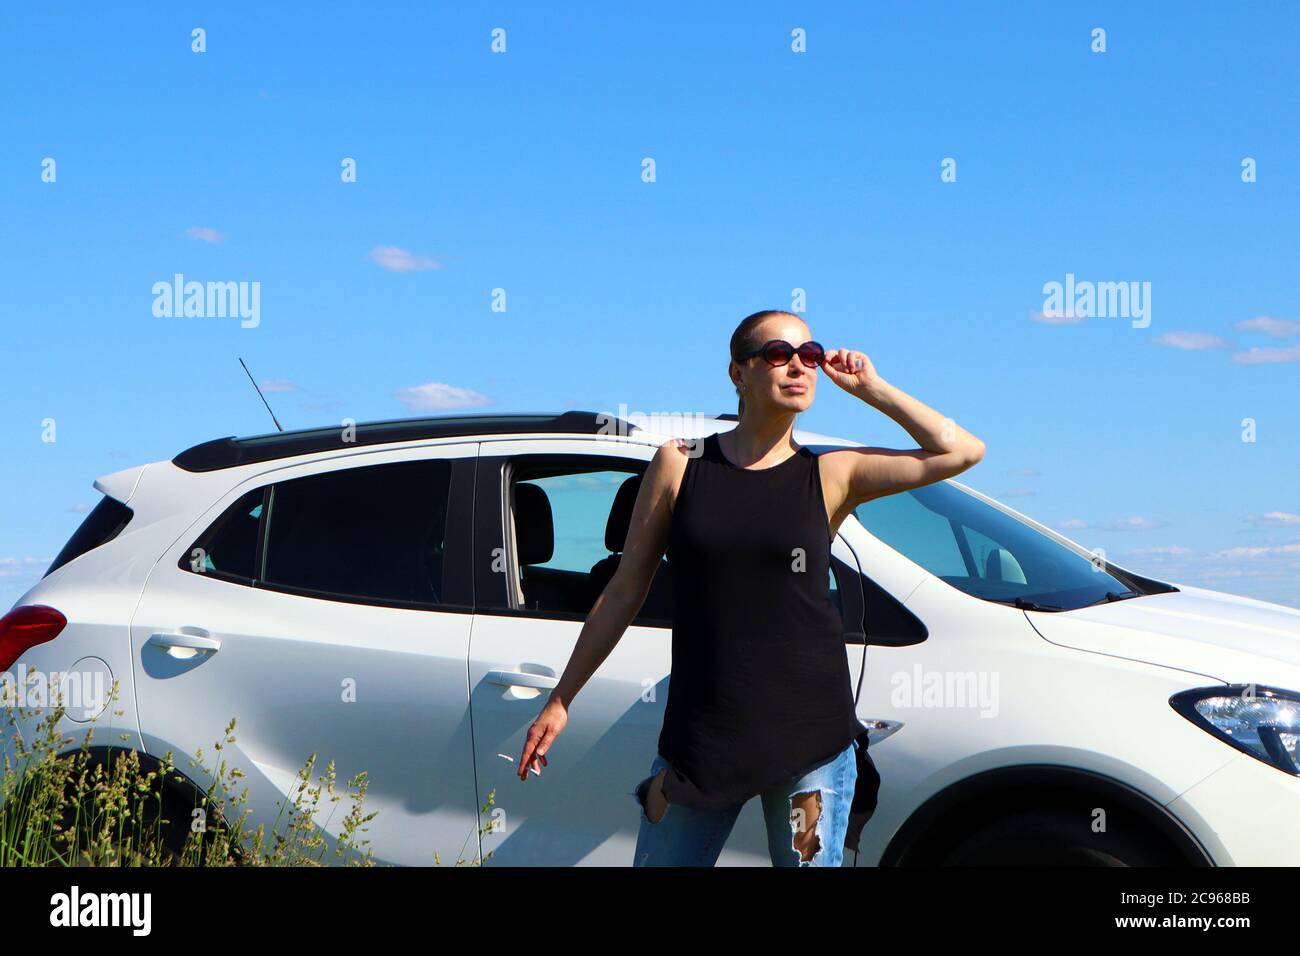 Pretty young woman wearing sunglasses standing near the white car against bright blue sky Stock Photo